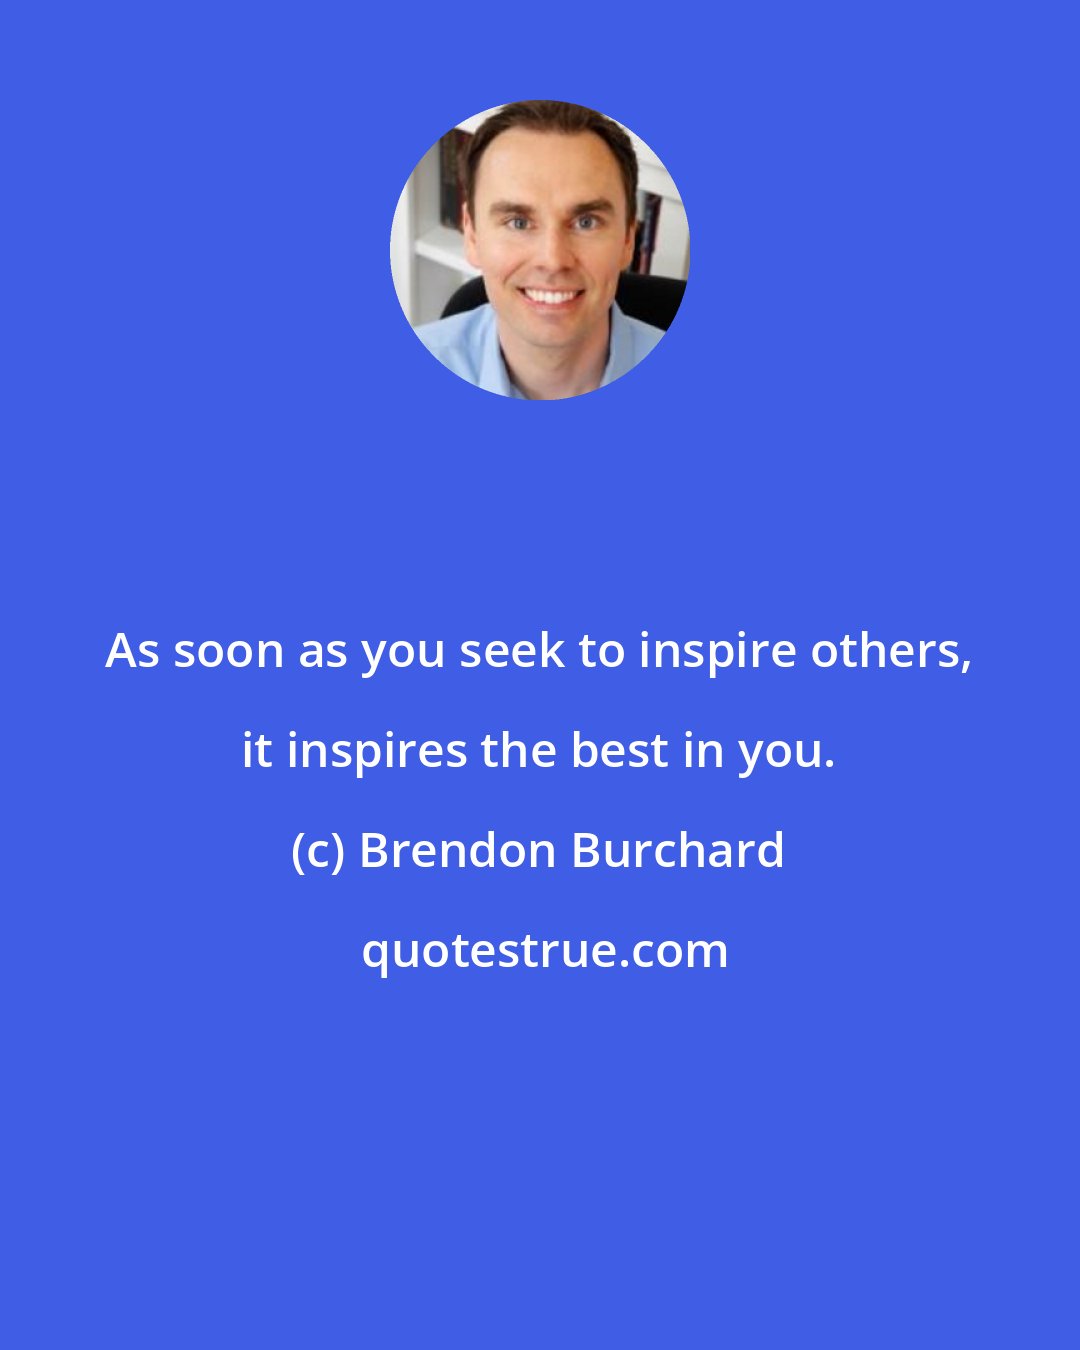 Brendon Burchard: As soon as you seek to inspire others, it inspires the best in you.